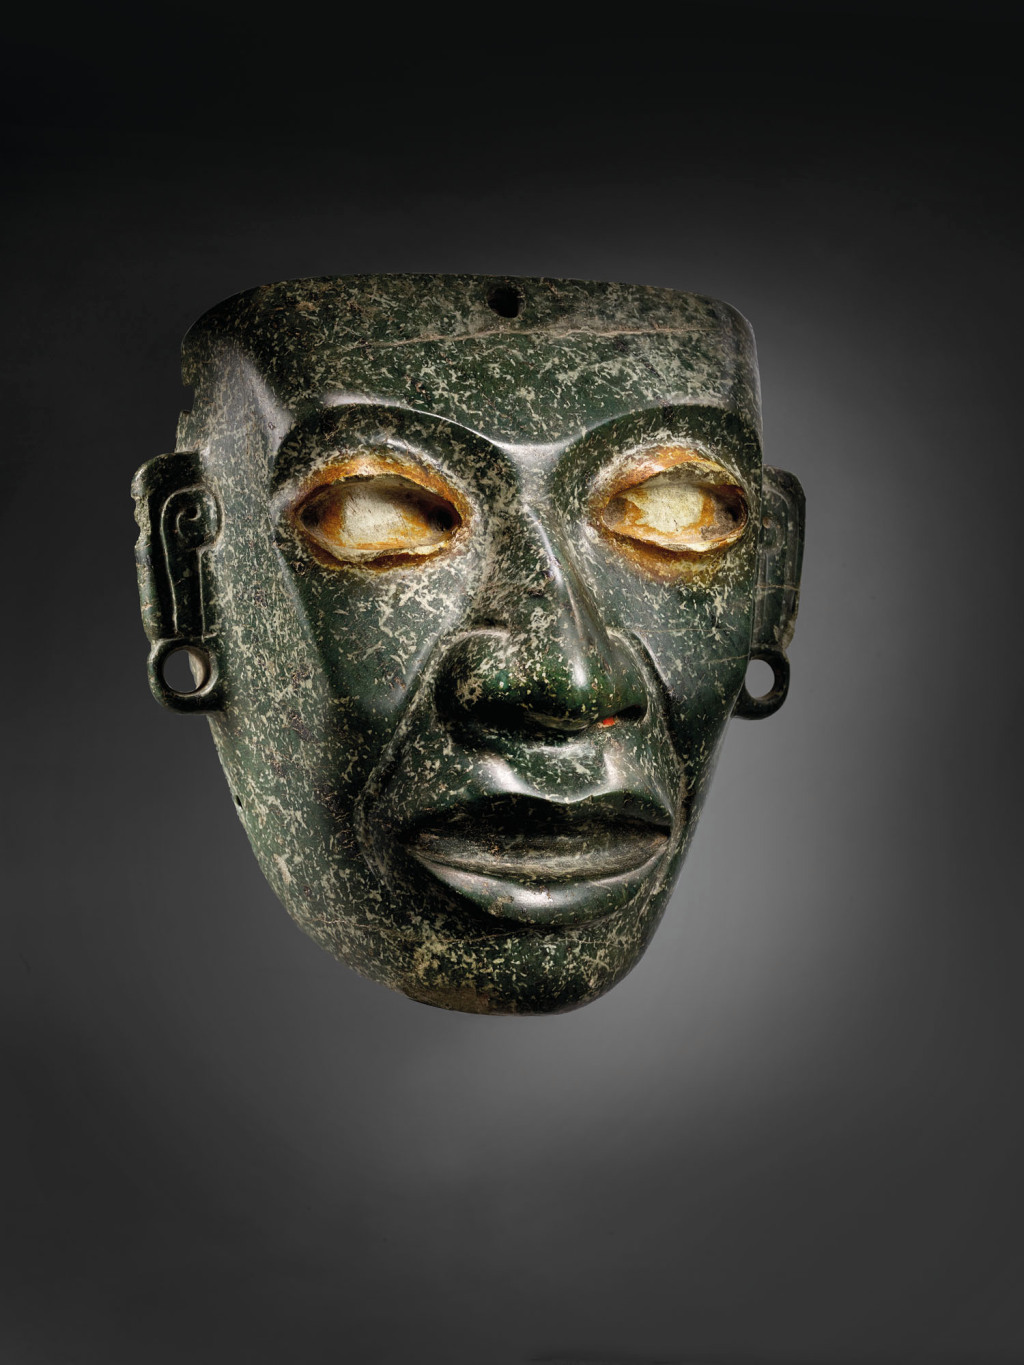 Mexico Files Legal Claim Over Pre-Columbian Art Set to Be Auctioned at Christie’s